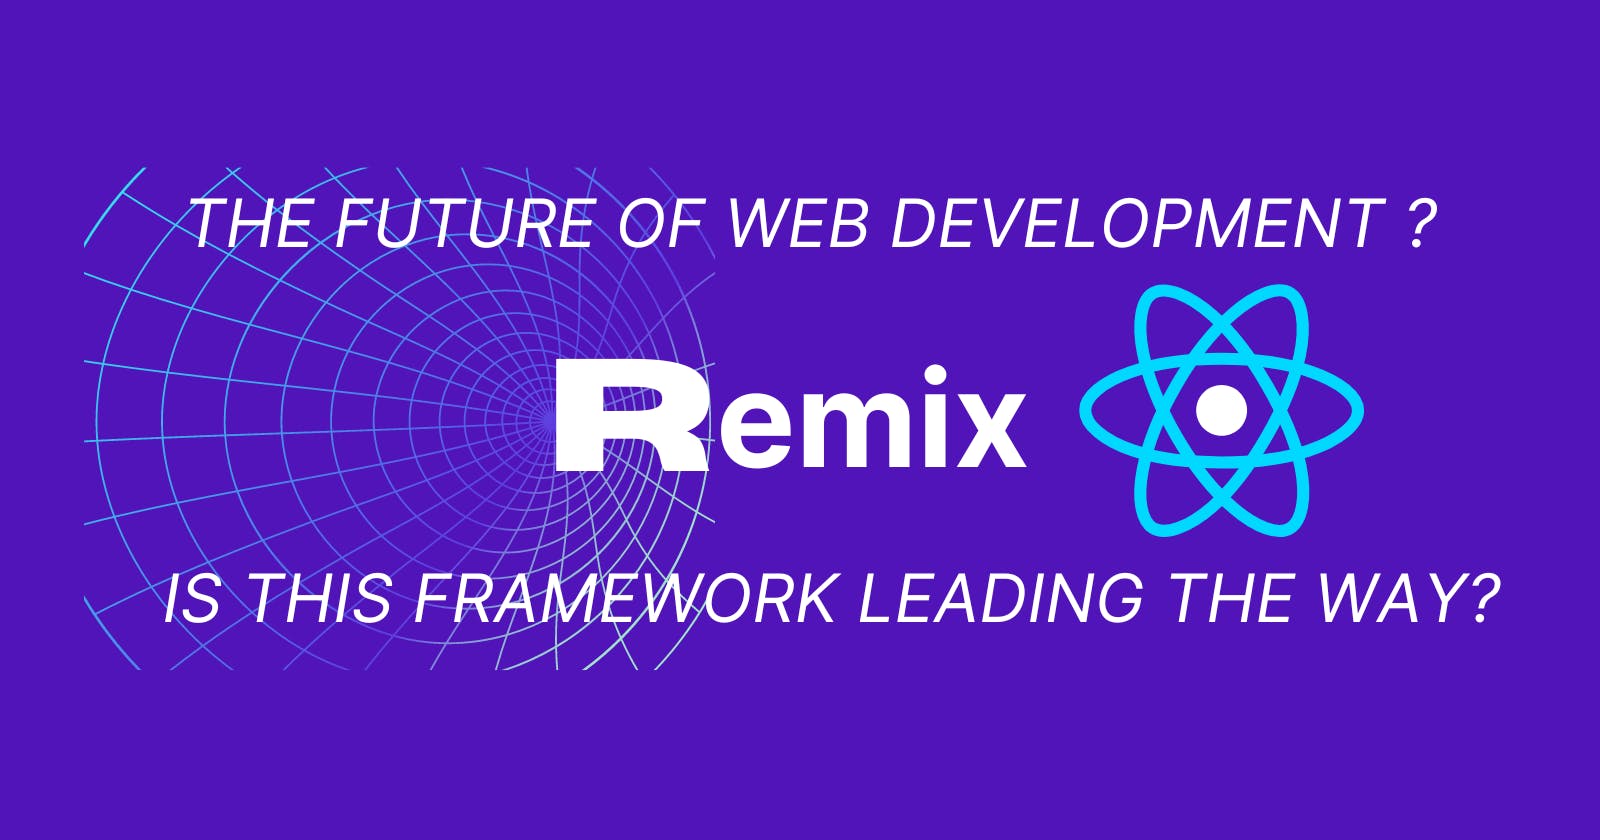 The Future of Web Development: Is the Remix Framework Leading the Way?